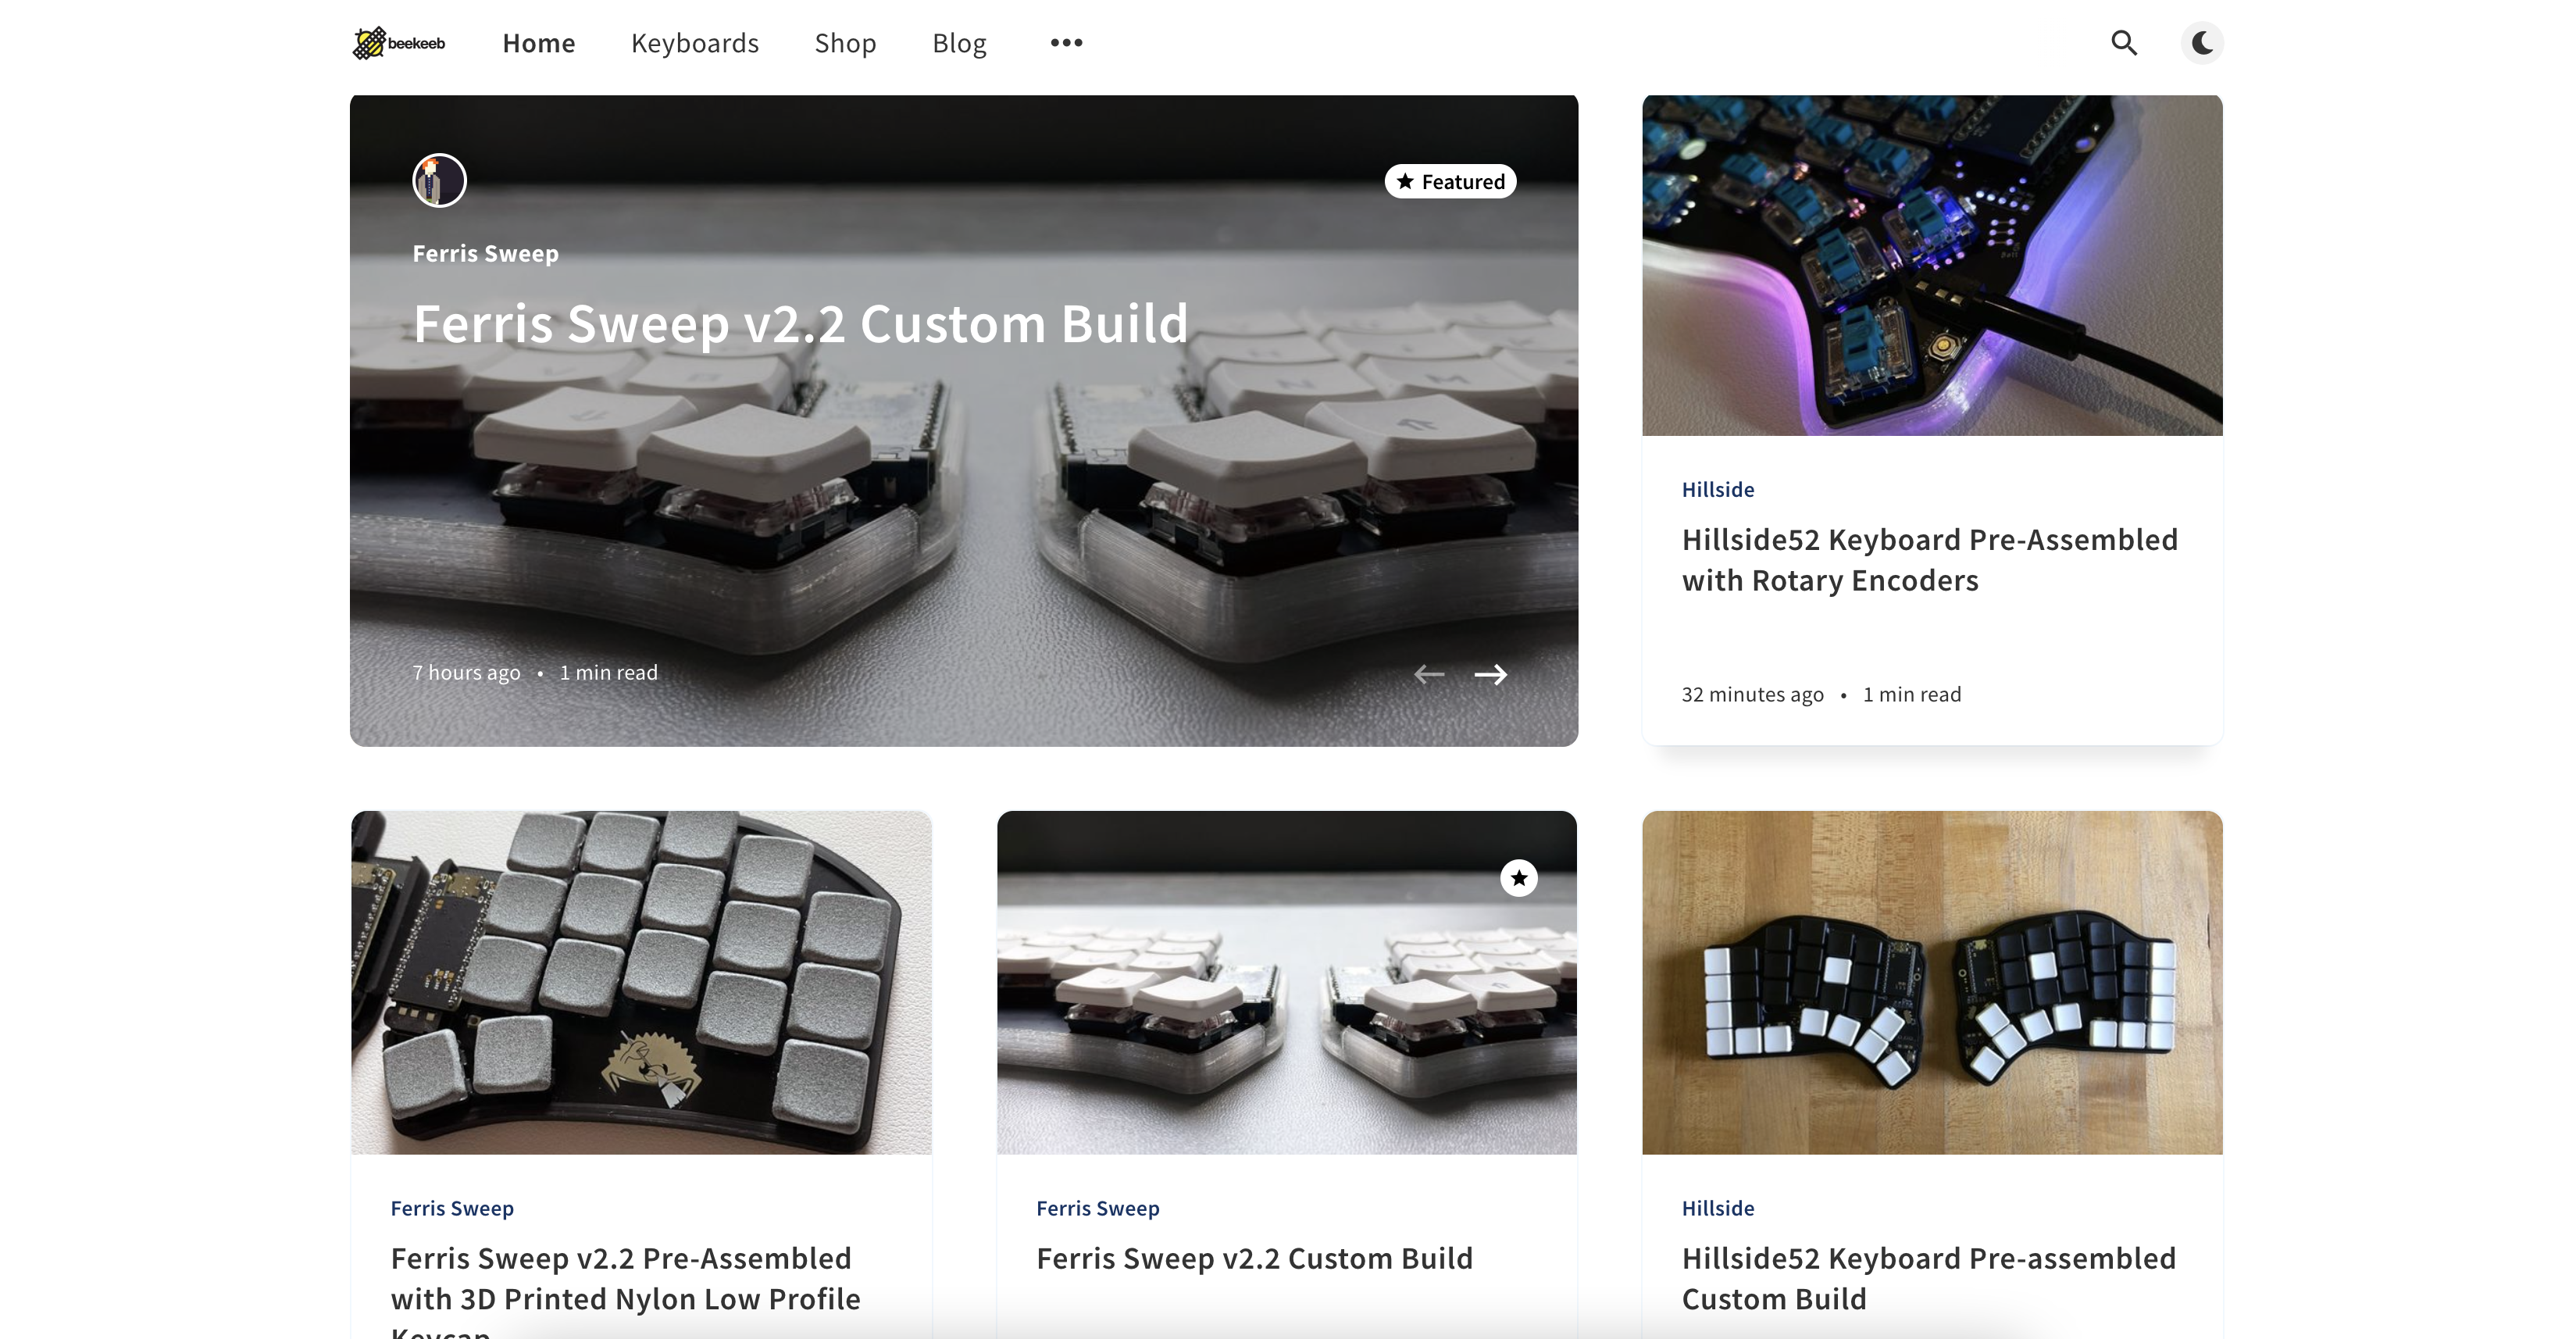 Launched a new site to showcase the custom build ideas from our customers